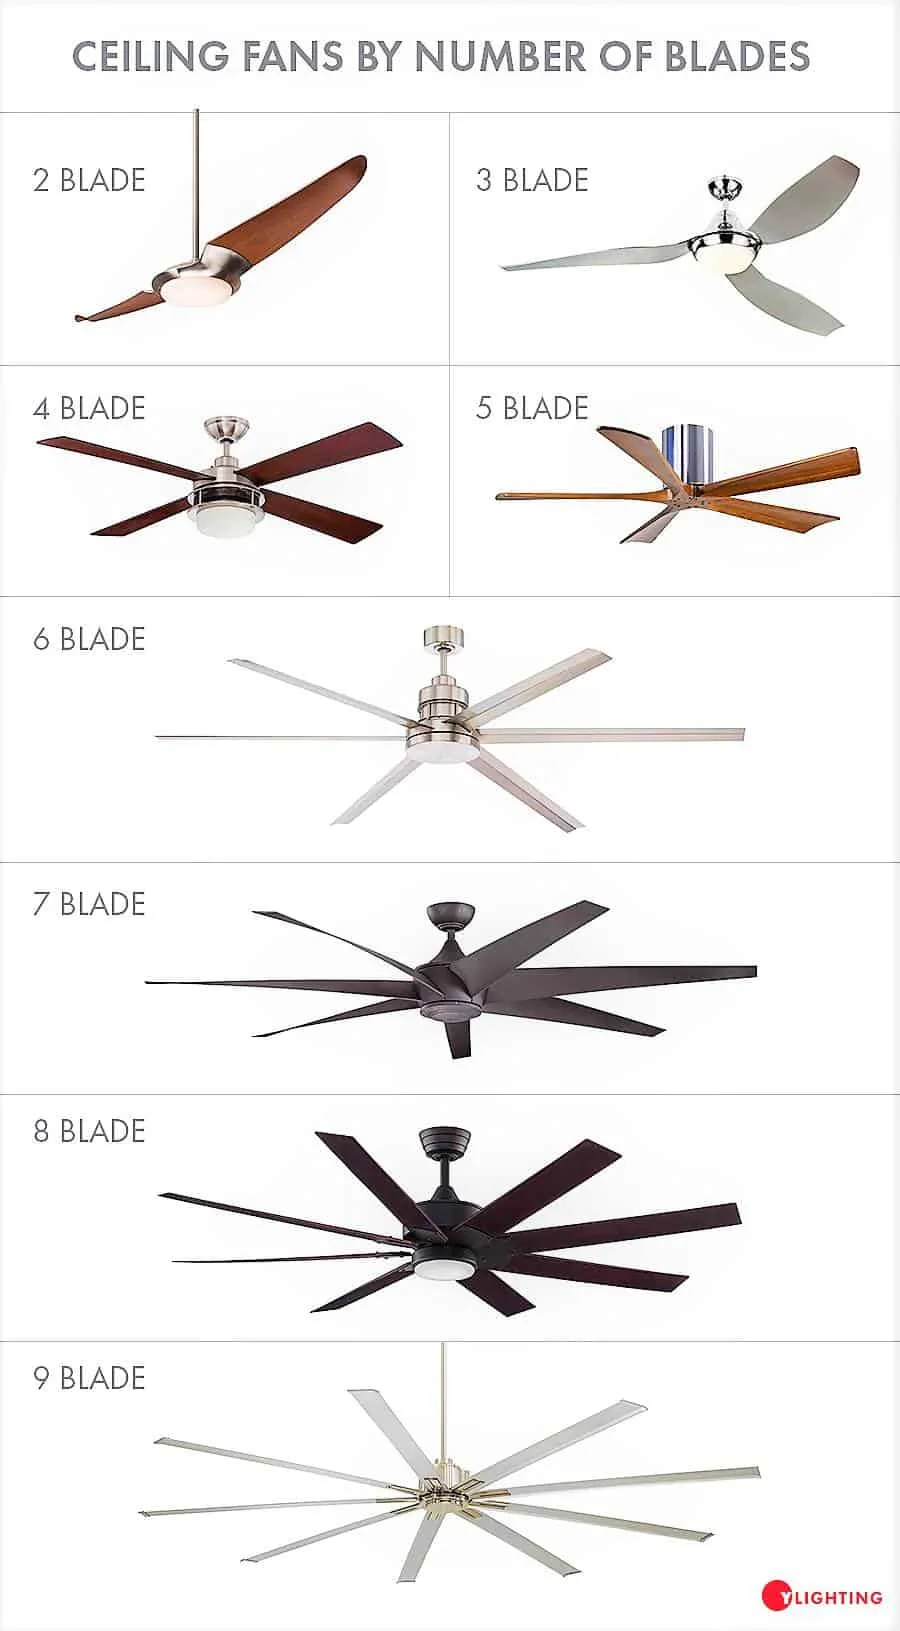 different number of blades- 2, 3, 4, 5, 6, 7, 8, 9 fan blades